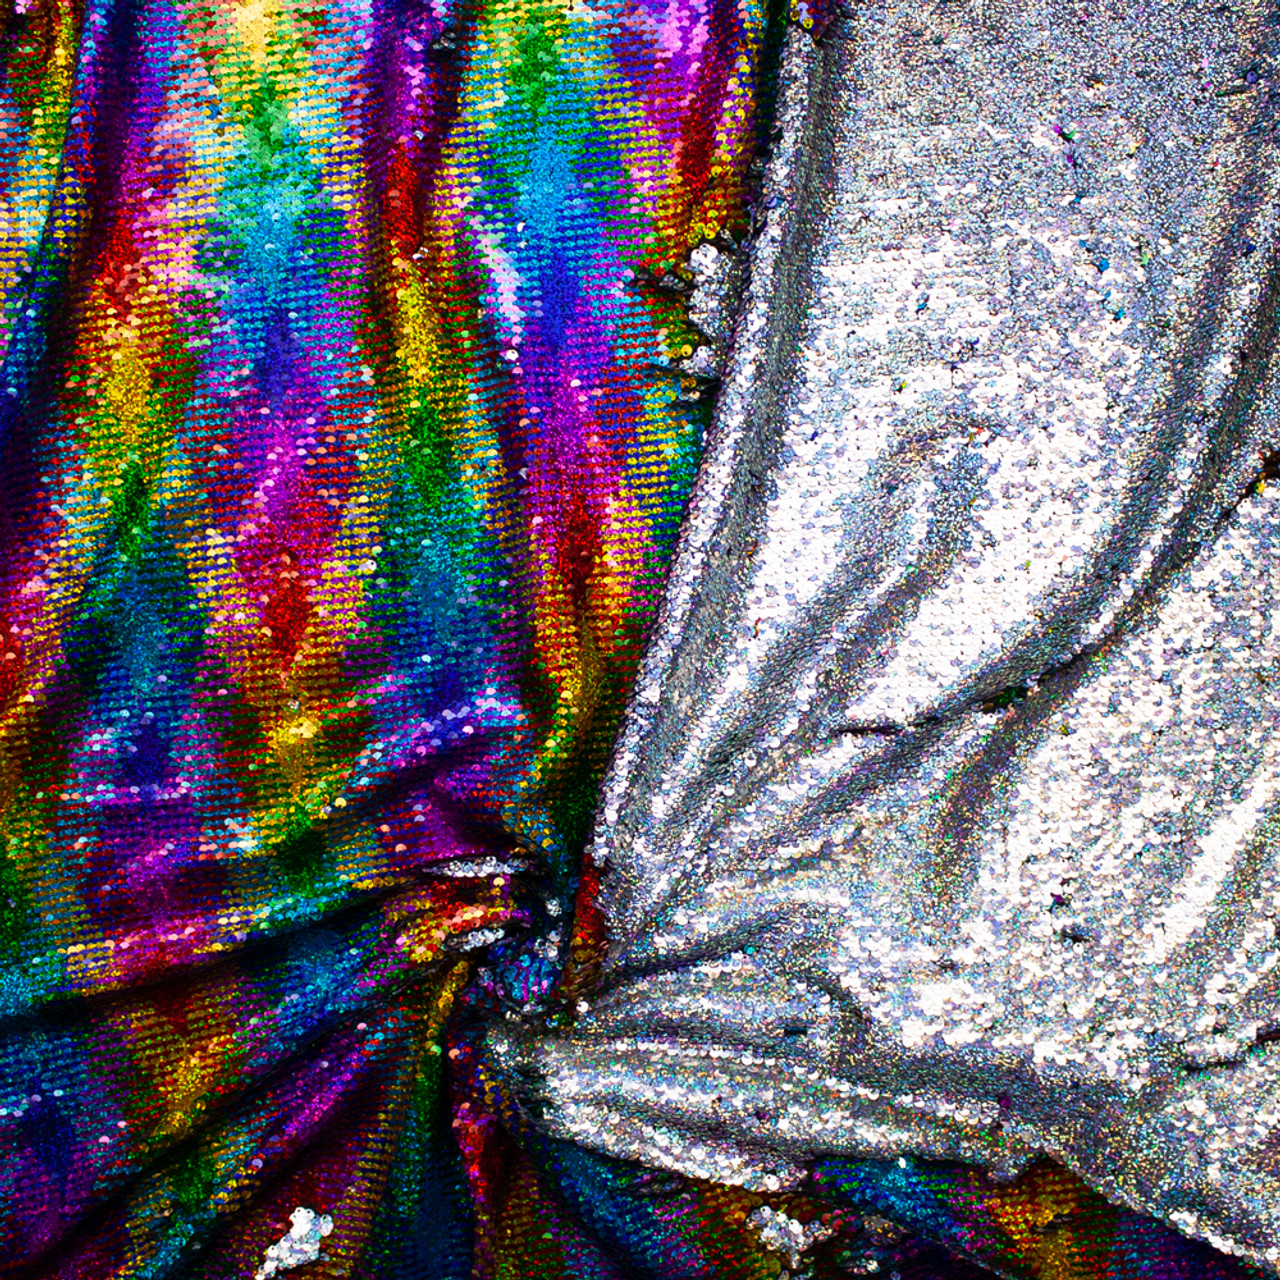 Fabric Sold By The Yard Multicolor Iridescent Glued Sequin